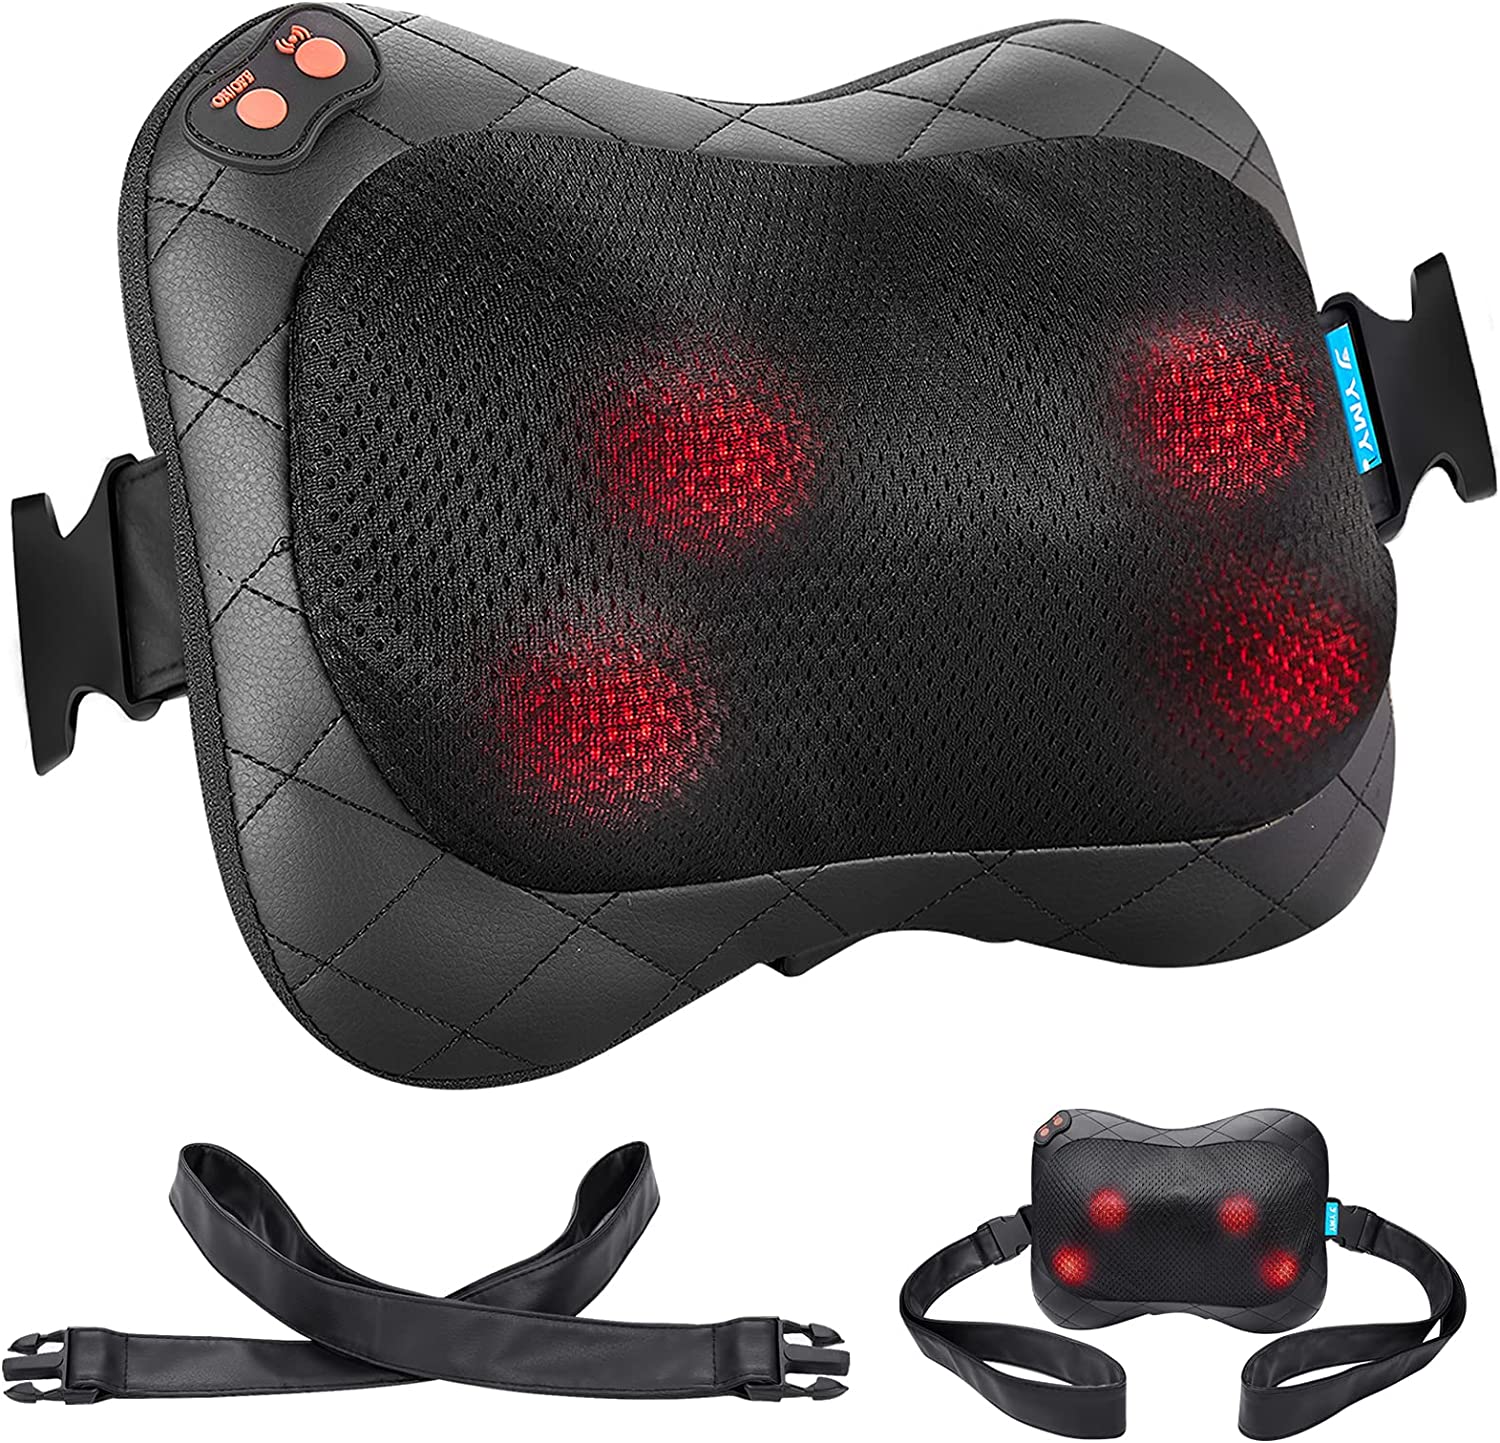  2. JYMY Back Massager,Shiatsu with Removable Magic Sleeve and Heat 